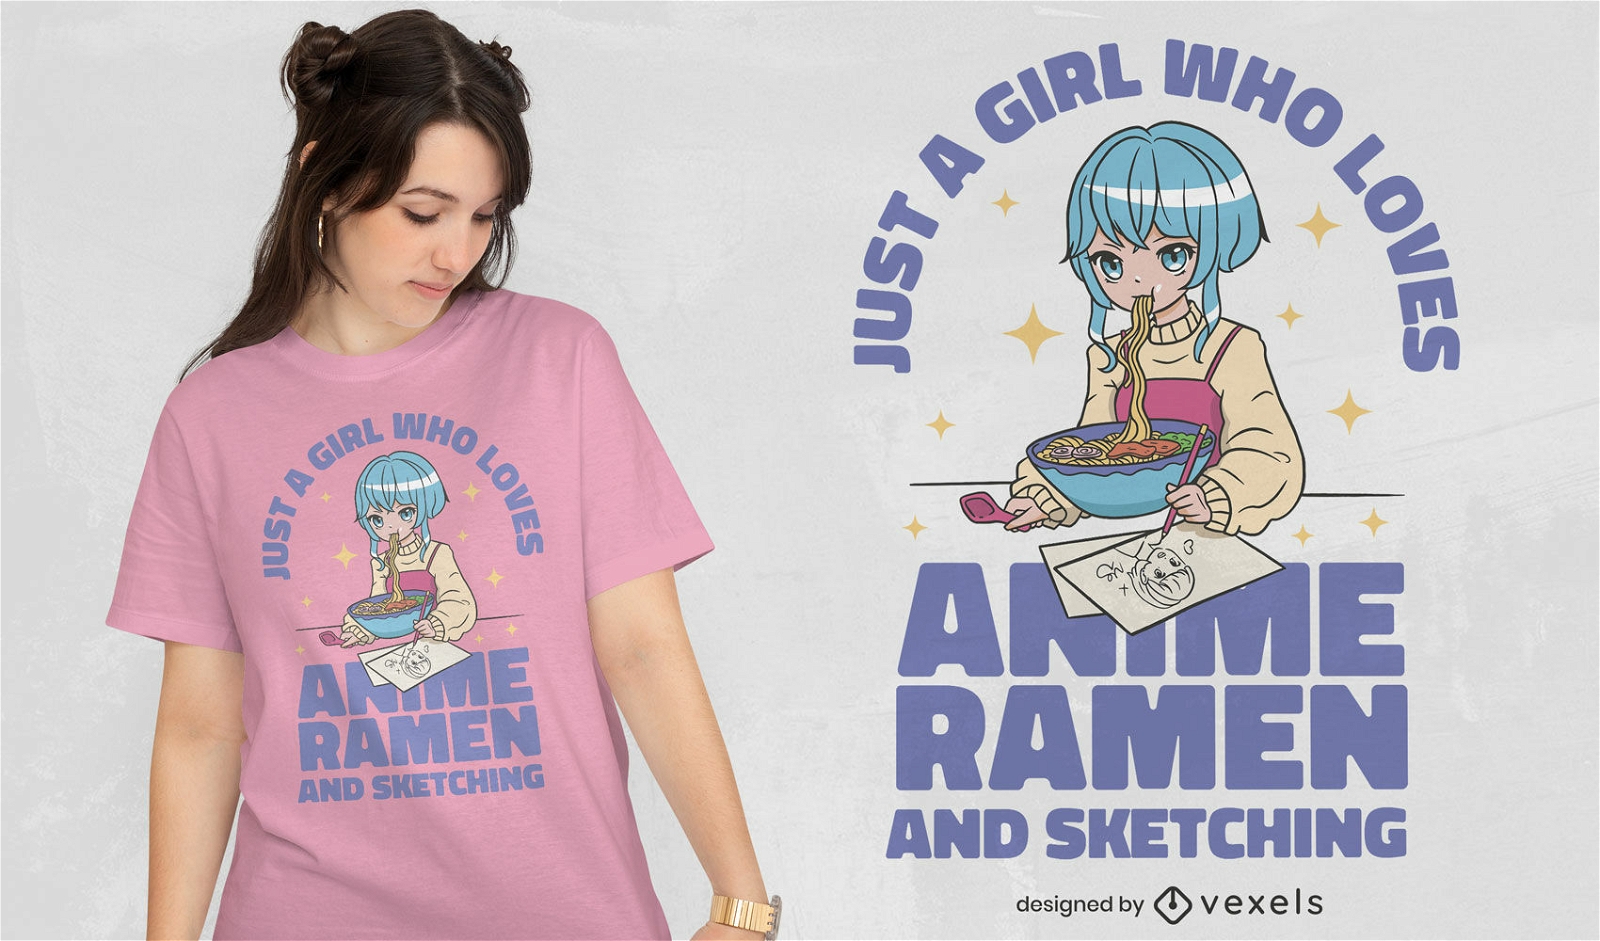 Girl who loves anime quote t-shirt design